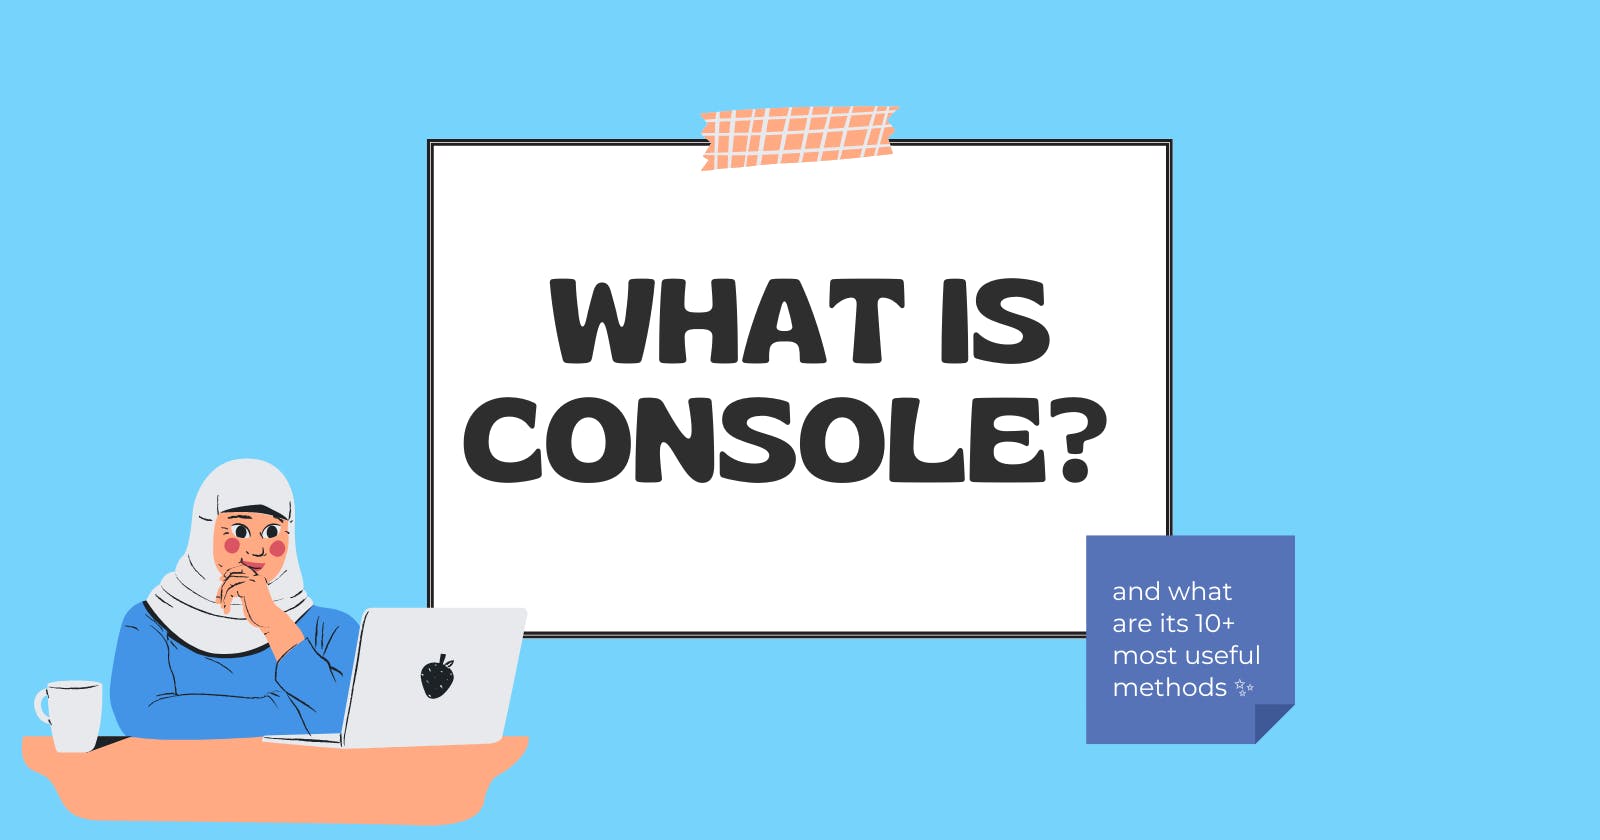 What is Console?